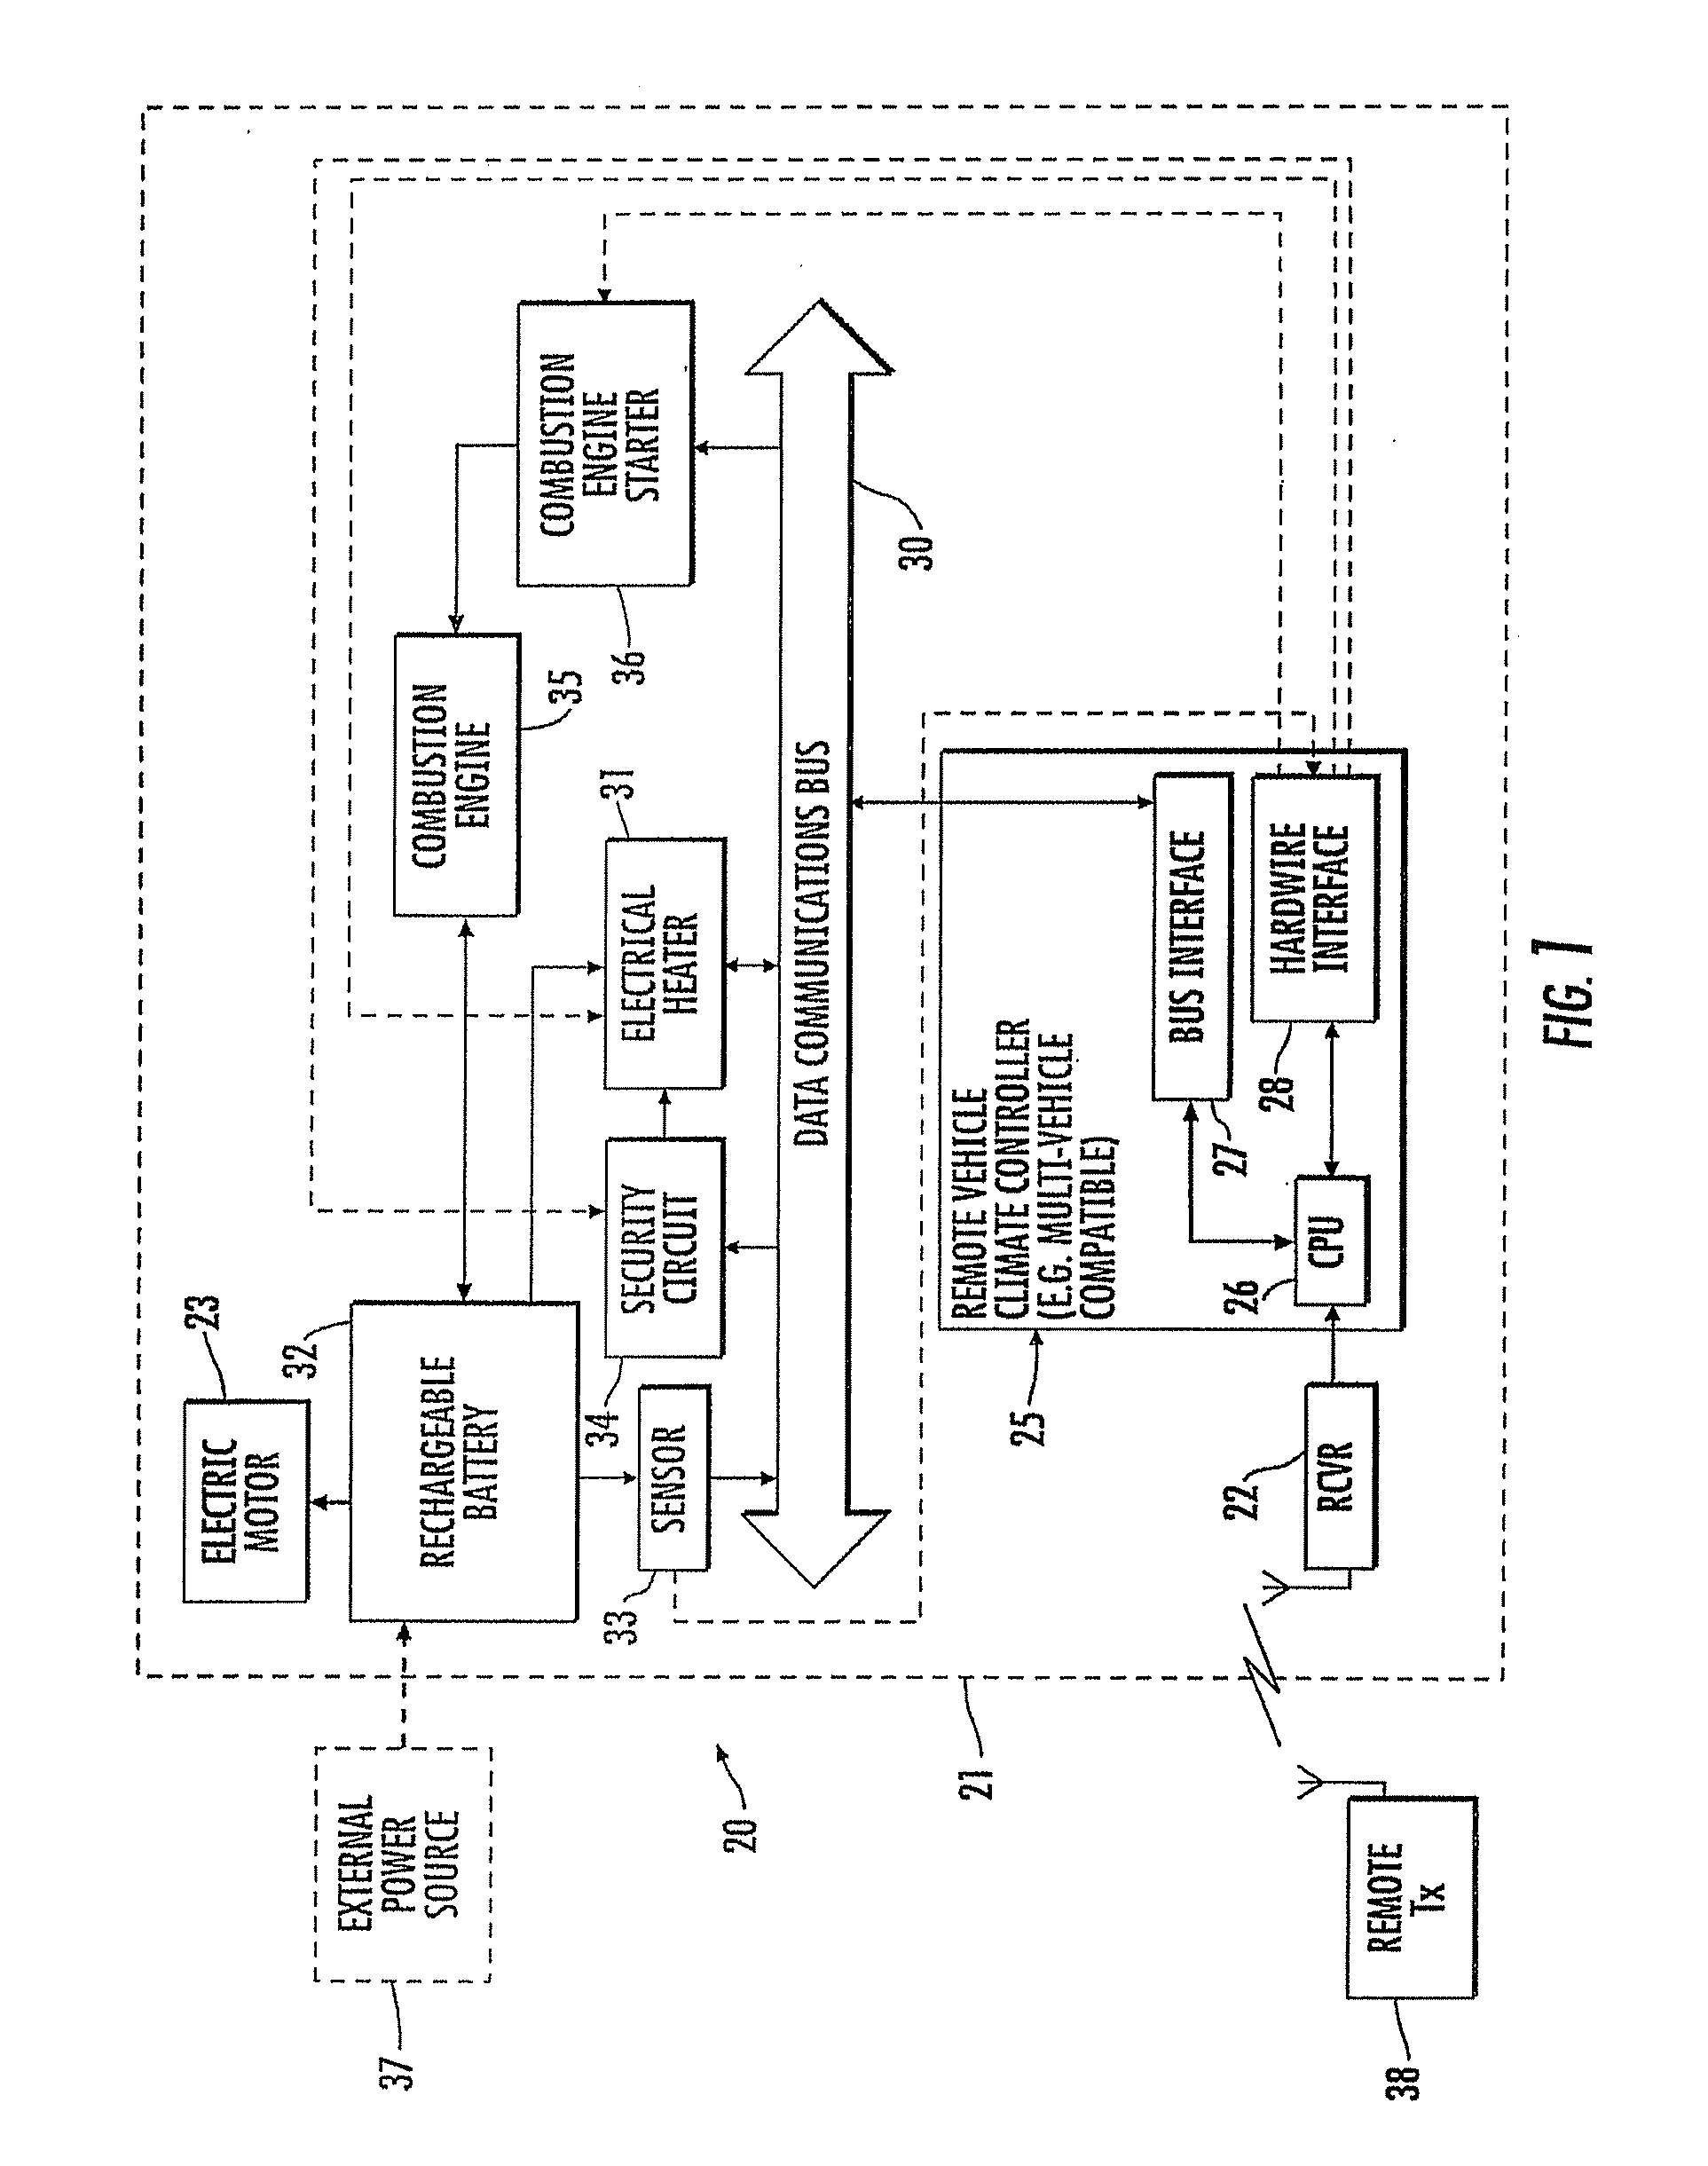 Remote climate control device including electrical heater for a hybrid vehicle and associated methods